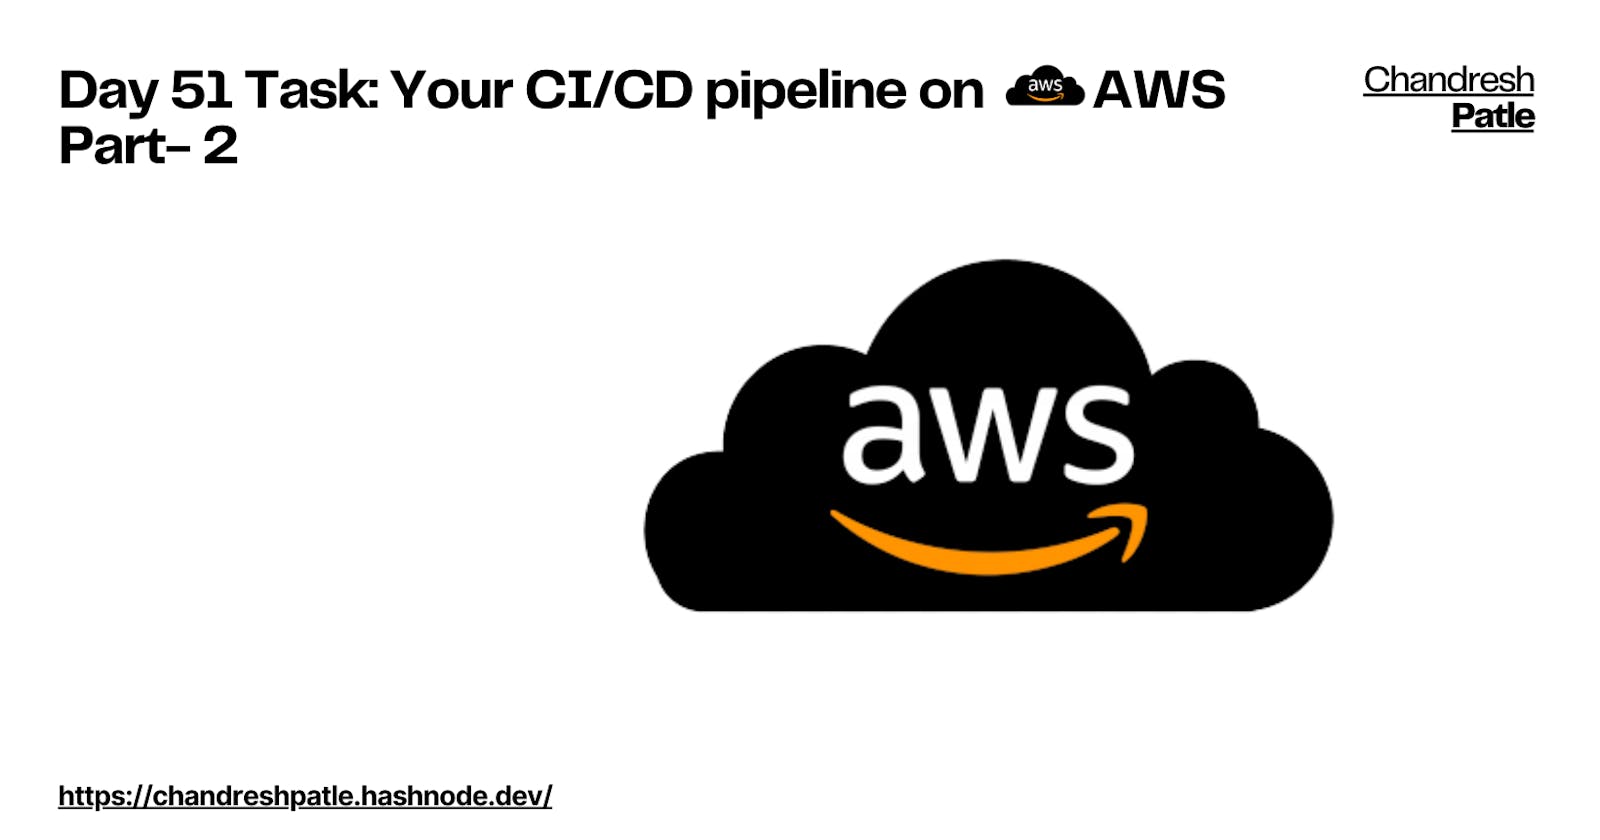 Day 51 Task: Your CI/CD pipeline on AWS Part- 2